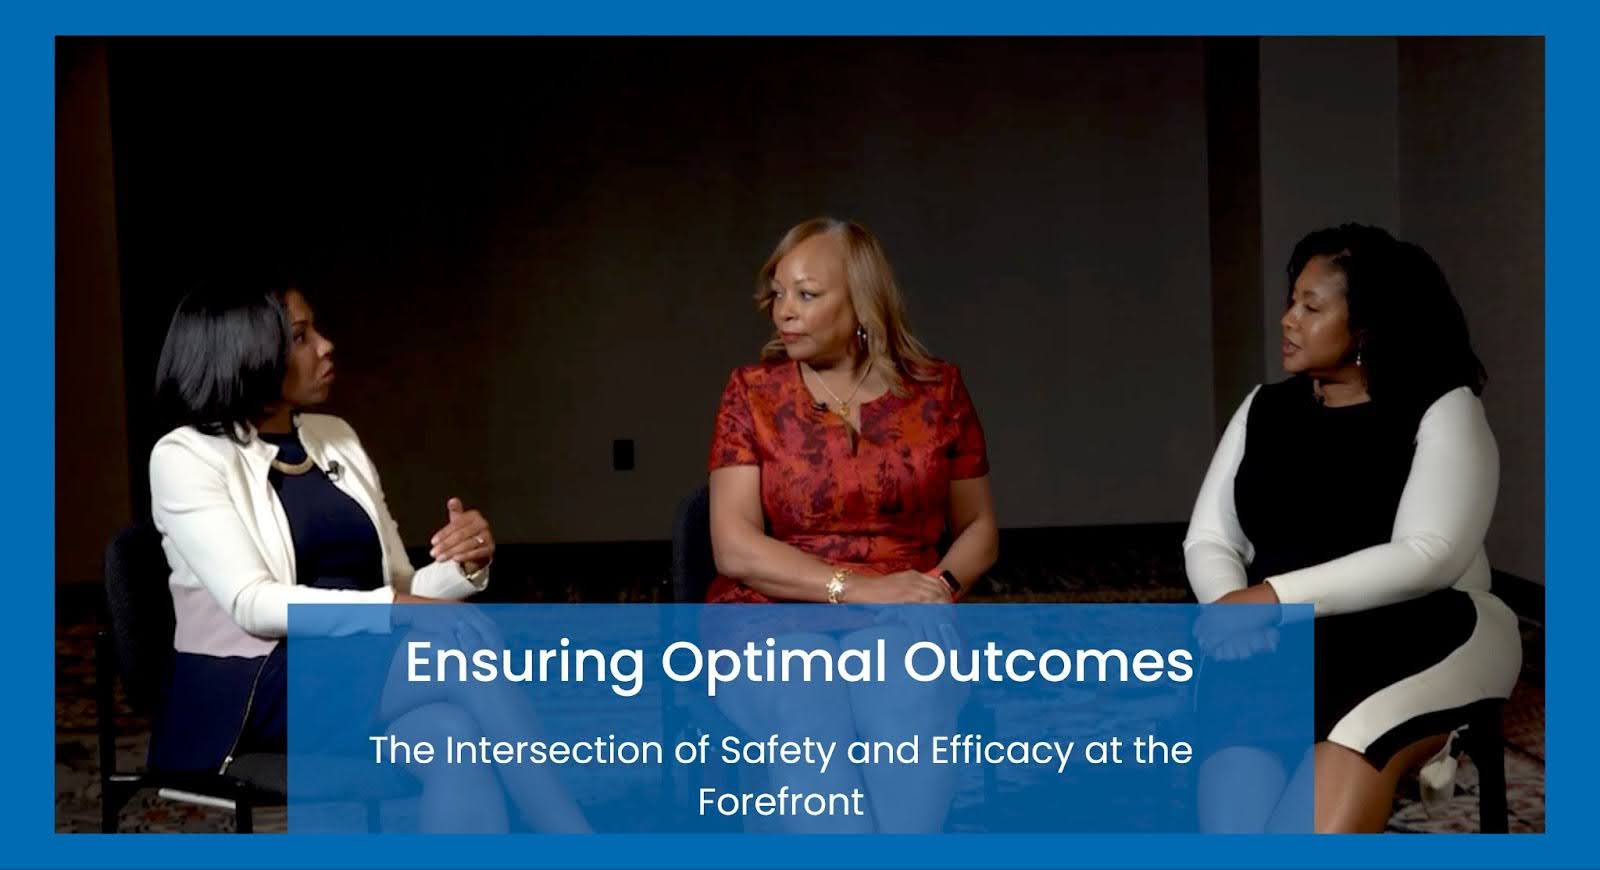 Ensuring Optimal Outcomes: The Intersection of Safety and Efficacy at the Forefront